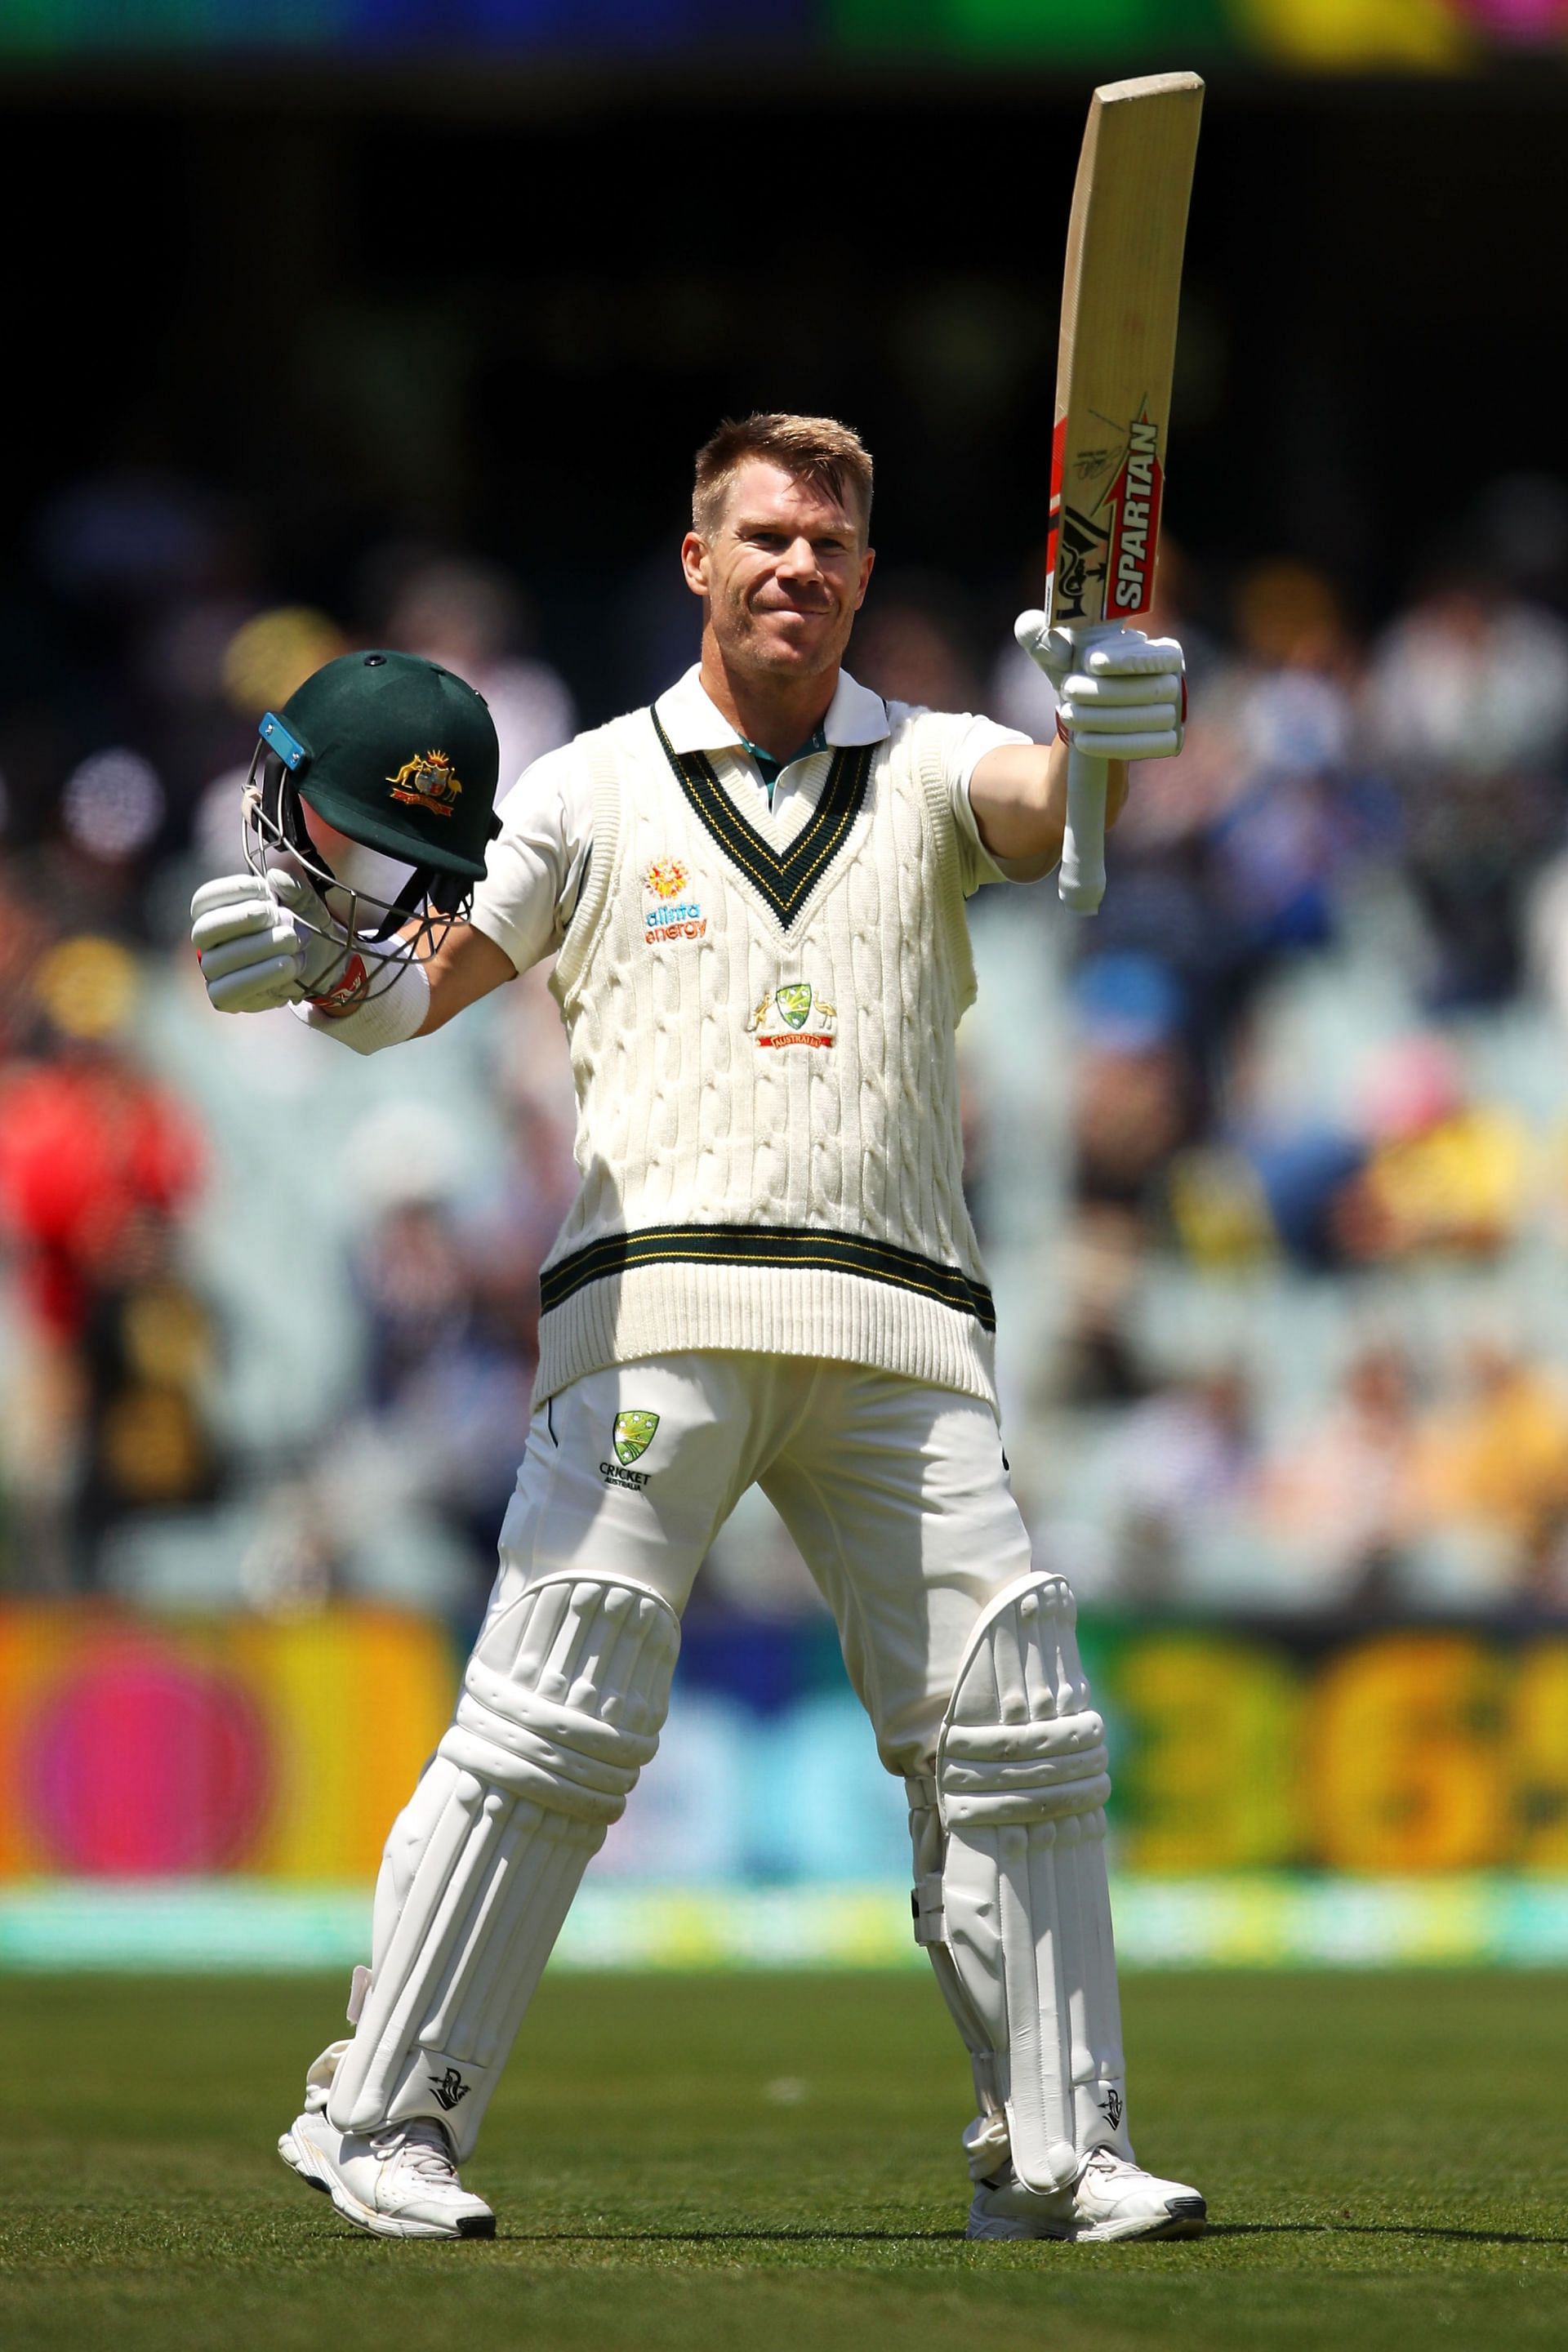 Warner was at his explosive best against the Kiwis, scoring 244 runs on Day 1